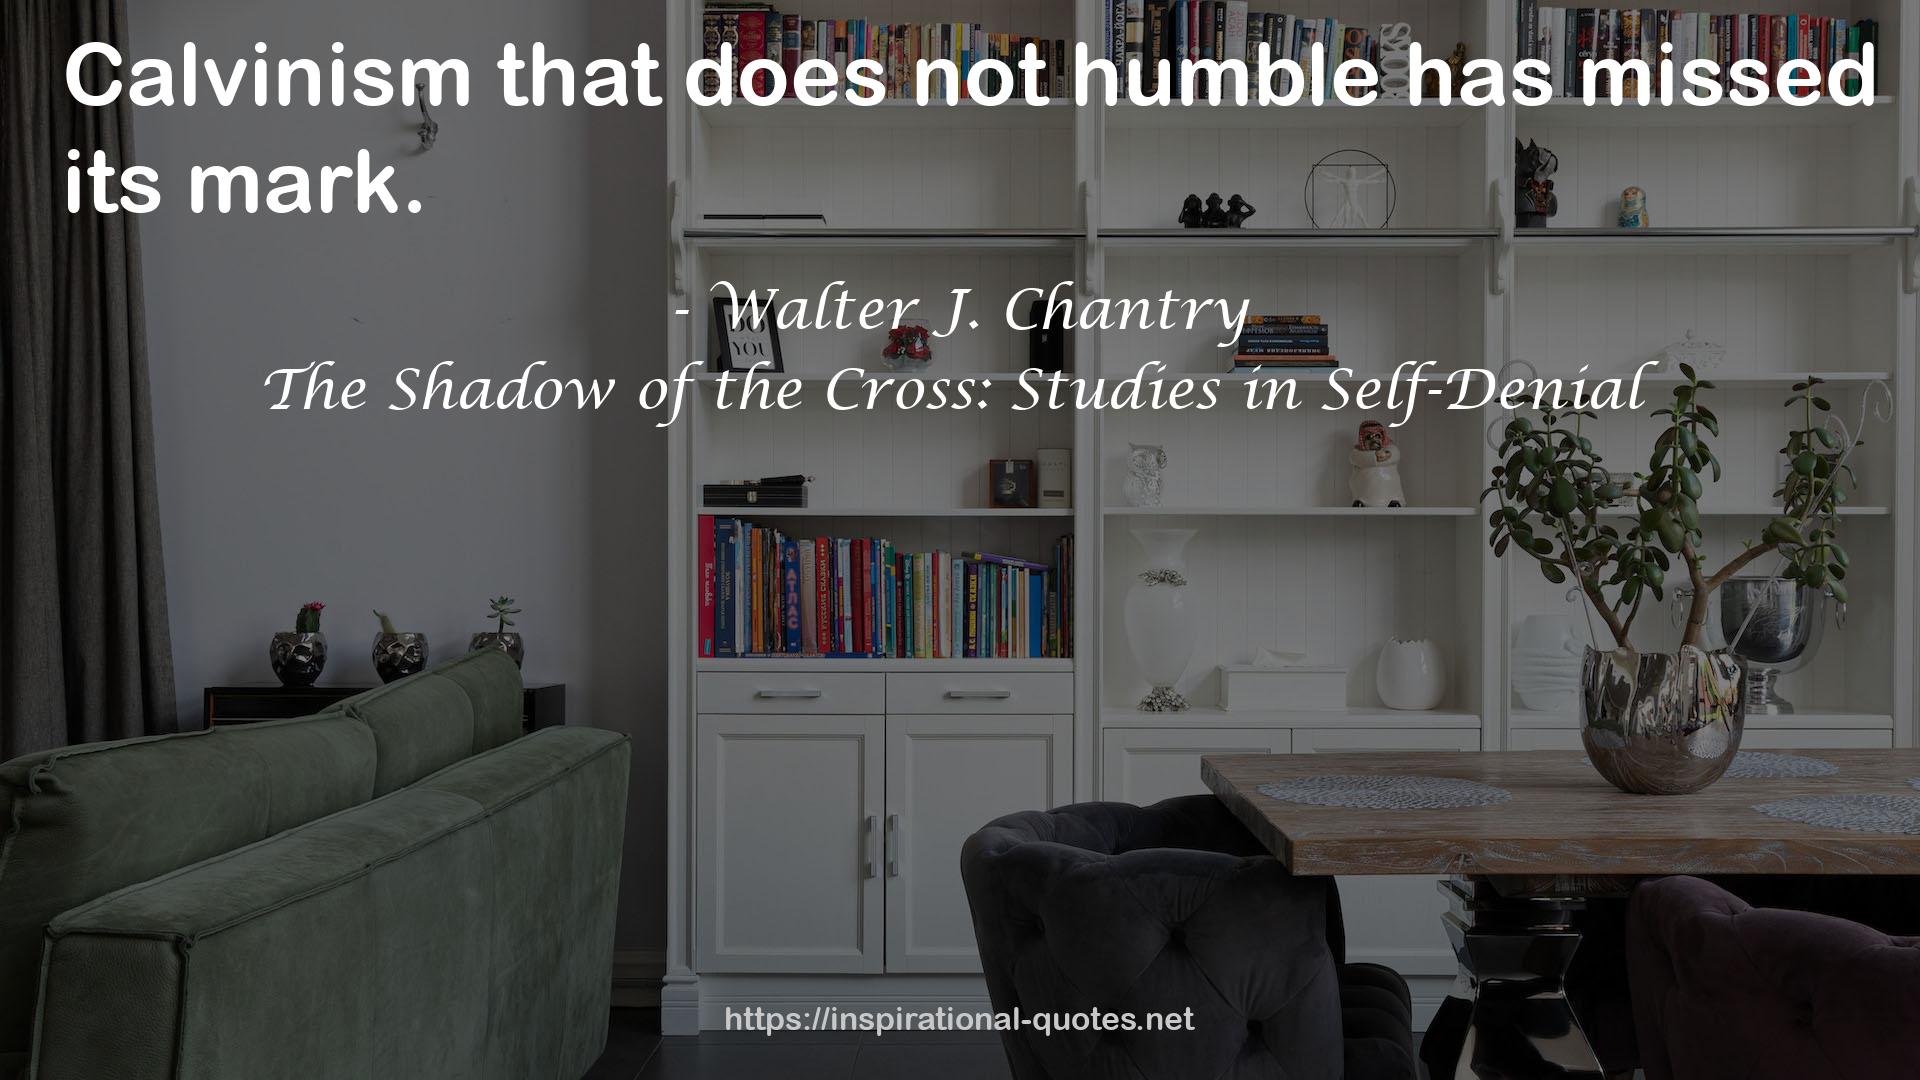 The Shadow of the Cross: Studies in Self-Denial QUOTES